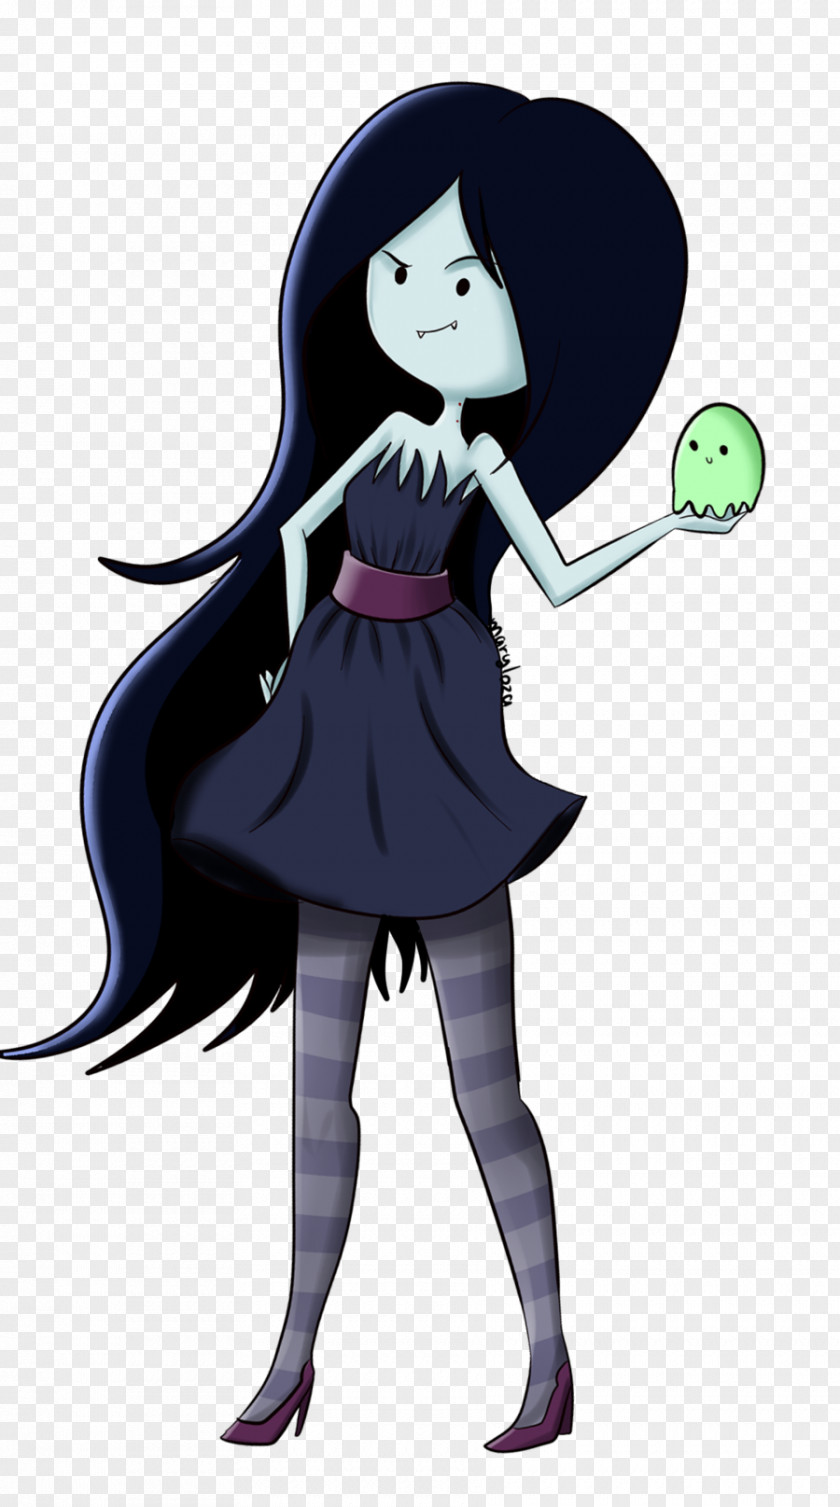 Finn The Human Marceline Vampire Queen Princess Bubblegum Flame Adventure Time: Explore Dungeon Because I Don't Know! PNG